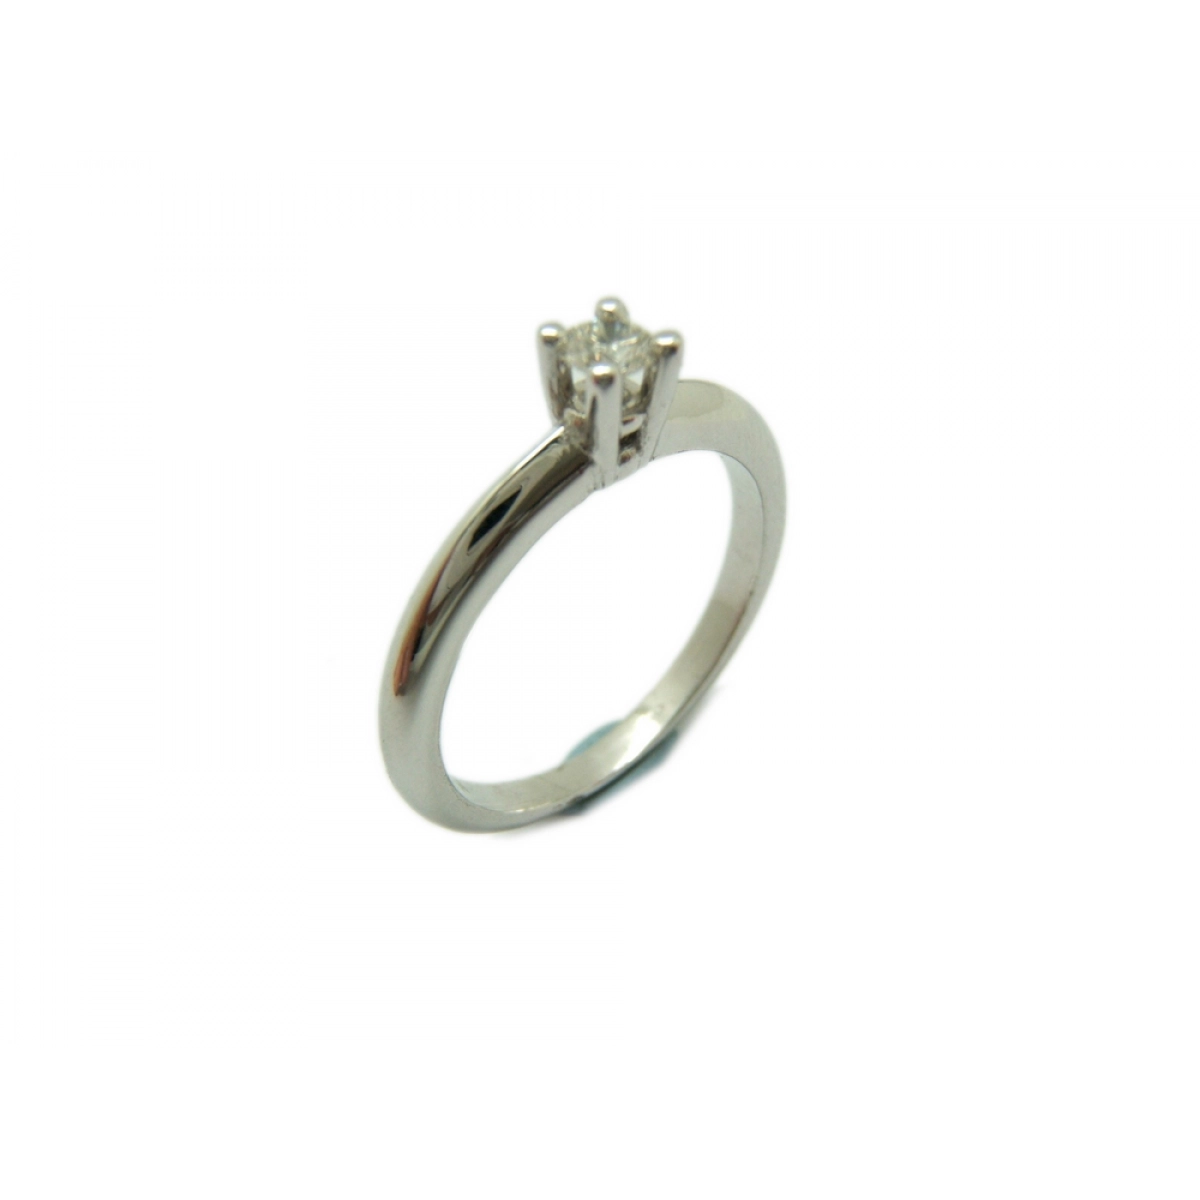 RING SOLITAIRE WHITE GOLD WITH DIAMOND A-358 B-79